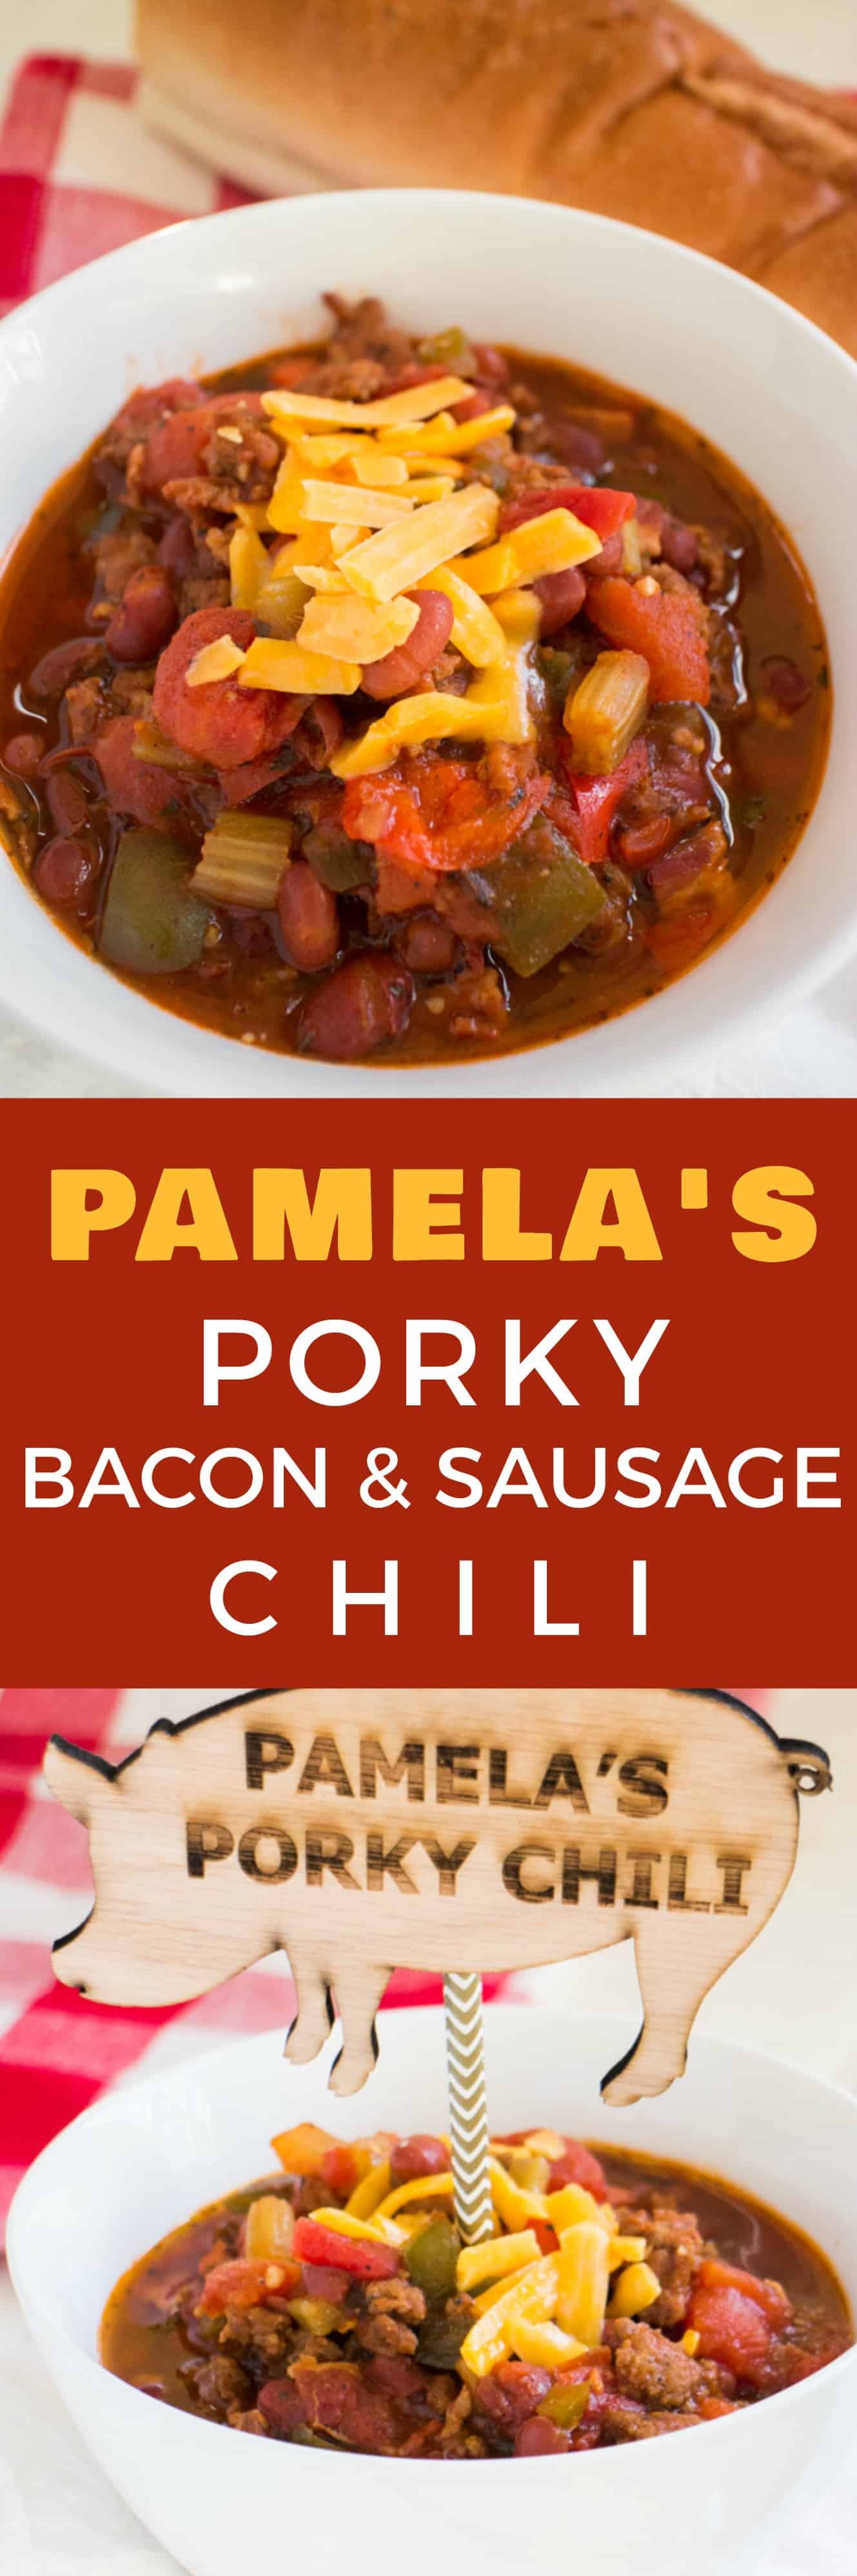 PAMELA’S Slow Cooker Pork Chili is made with BACON and SAUSAGE! This pork chili is one of the easiest crockpot recipes with diced tomatoes and beans! If you’re looking for dinner ideas to make as your family’s favorite comfort food dinners, then this it!   Ready in 6 hours on LOW. Serve with shredded cheese and a big piece of crusty bread! 